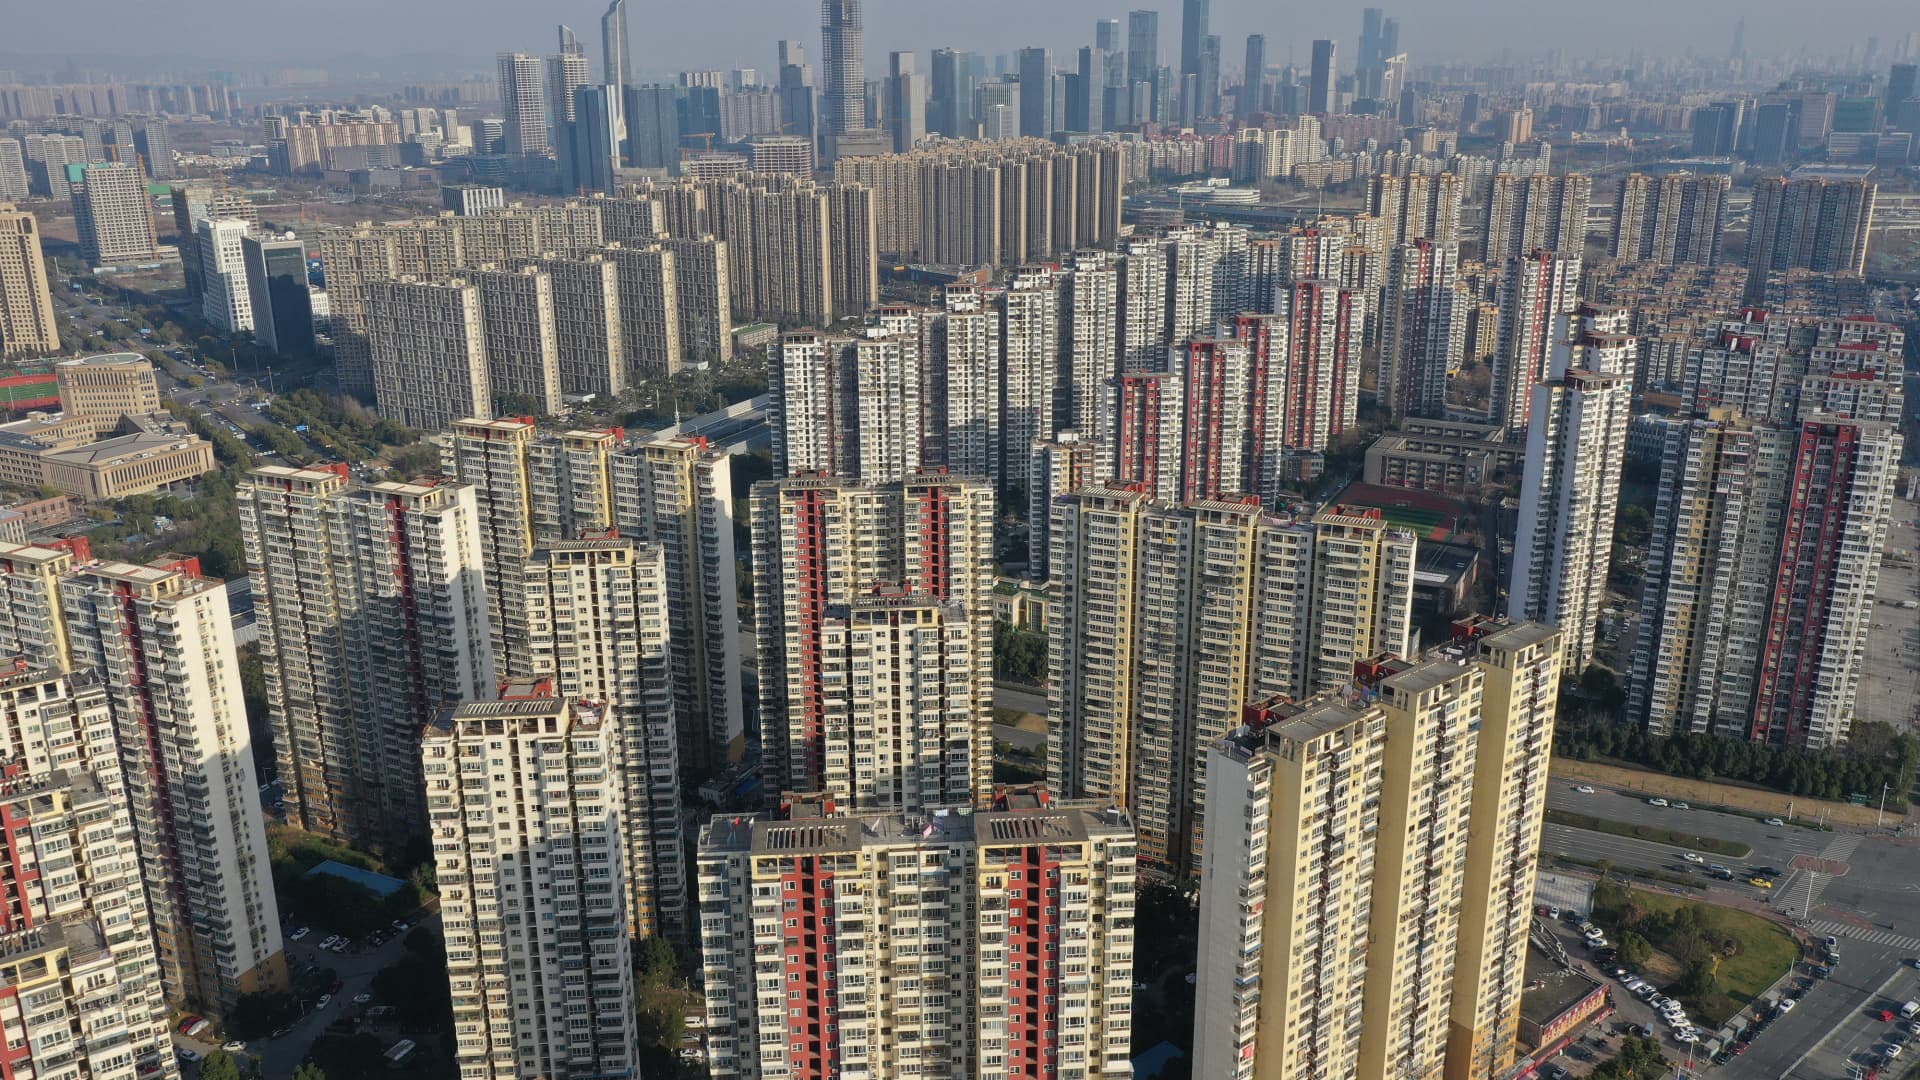 China’s real estate crisis isn’t over yet, IMF says